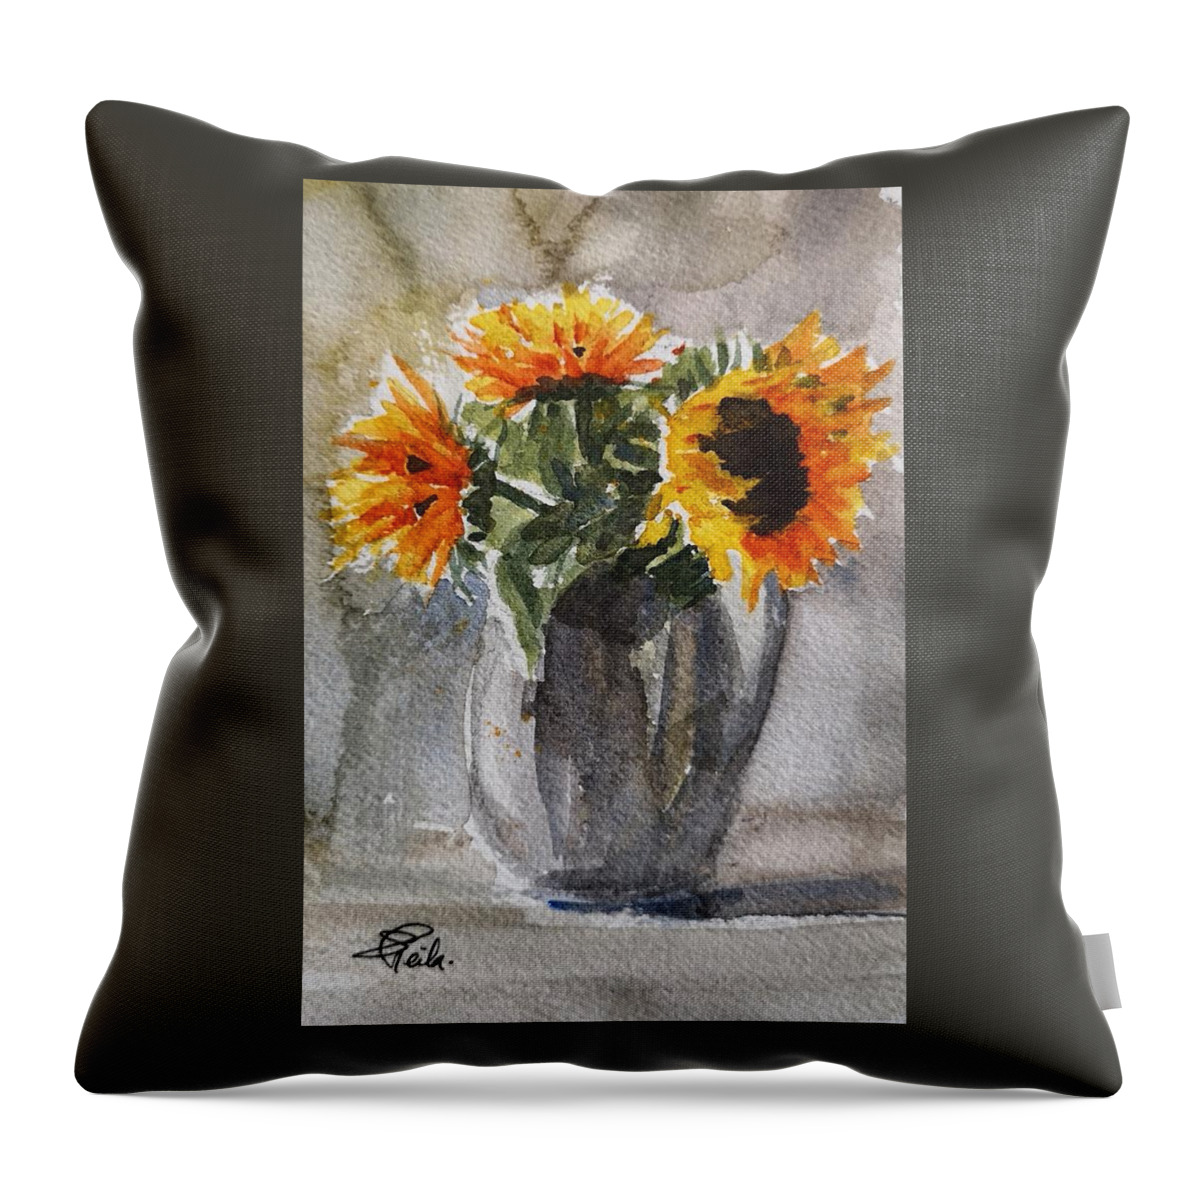 Still Life Throw Pillow featuring the painting Sunflowers by Sheila Romard